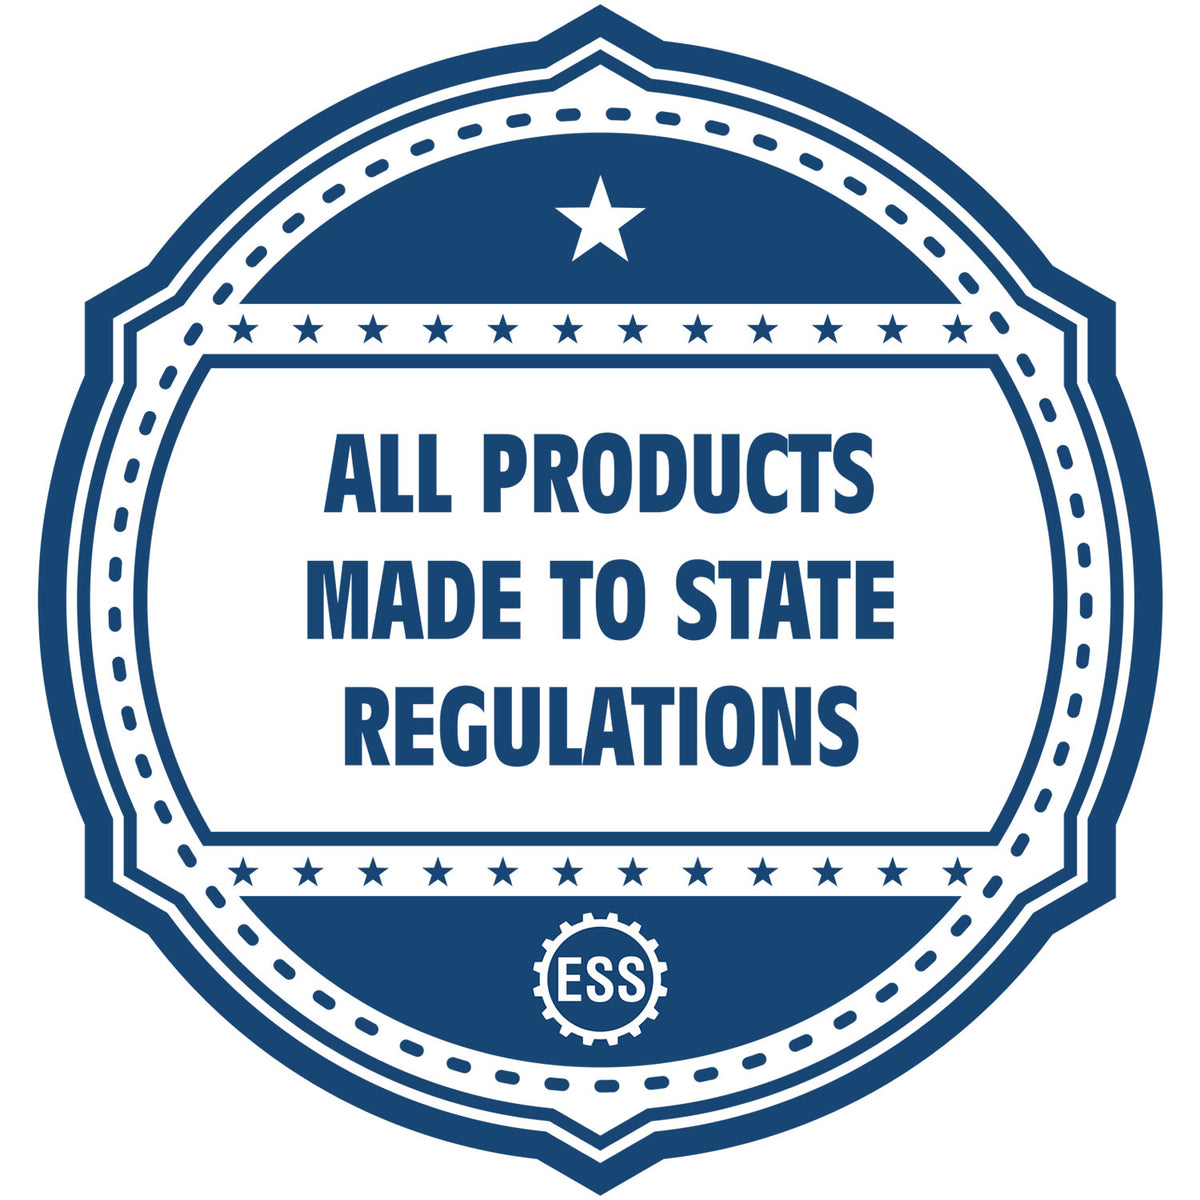 An icon or badge element for the Premium MaxLight Pre-Inked South Carolina Engineering Stamp showing that this product is made in compliance with state regulations.